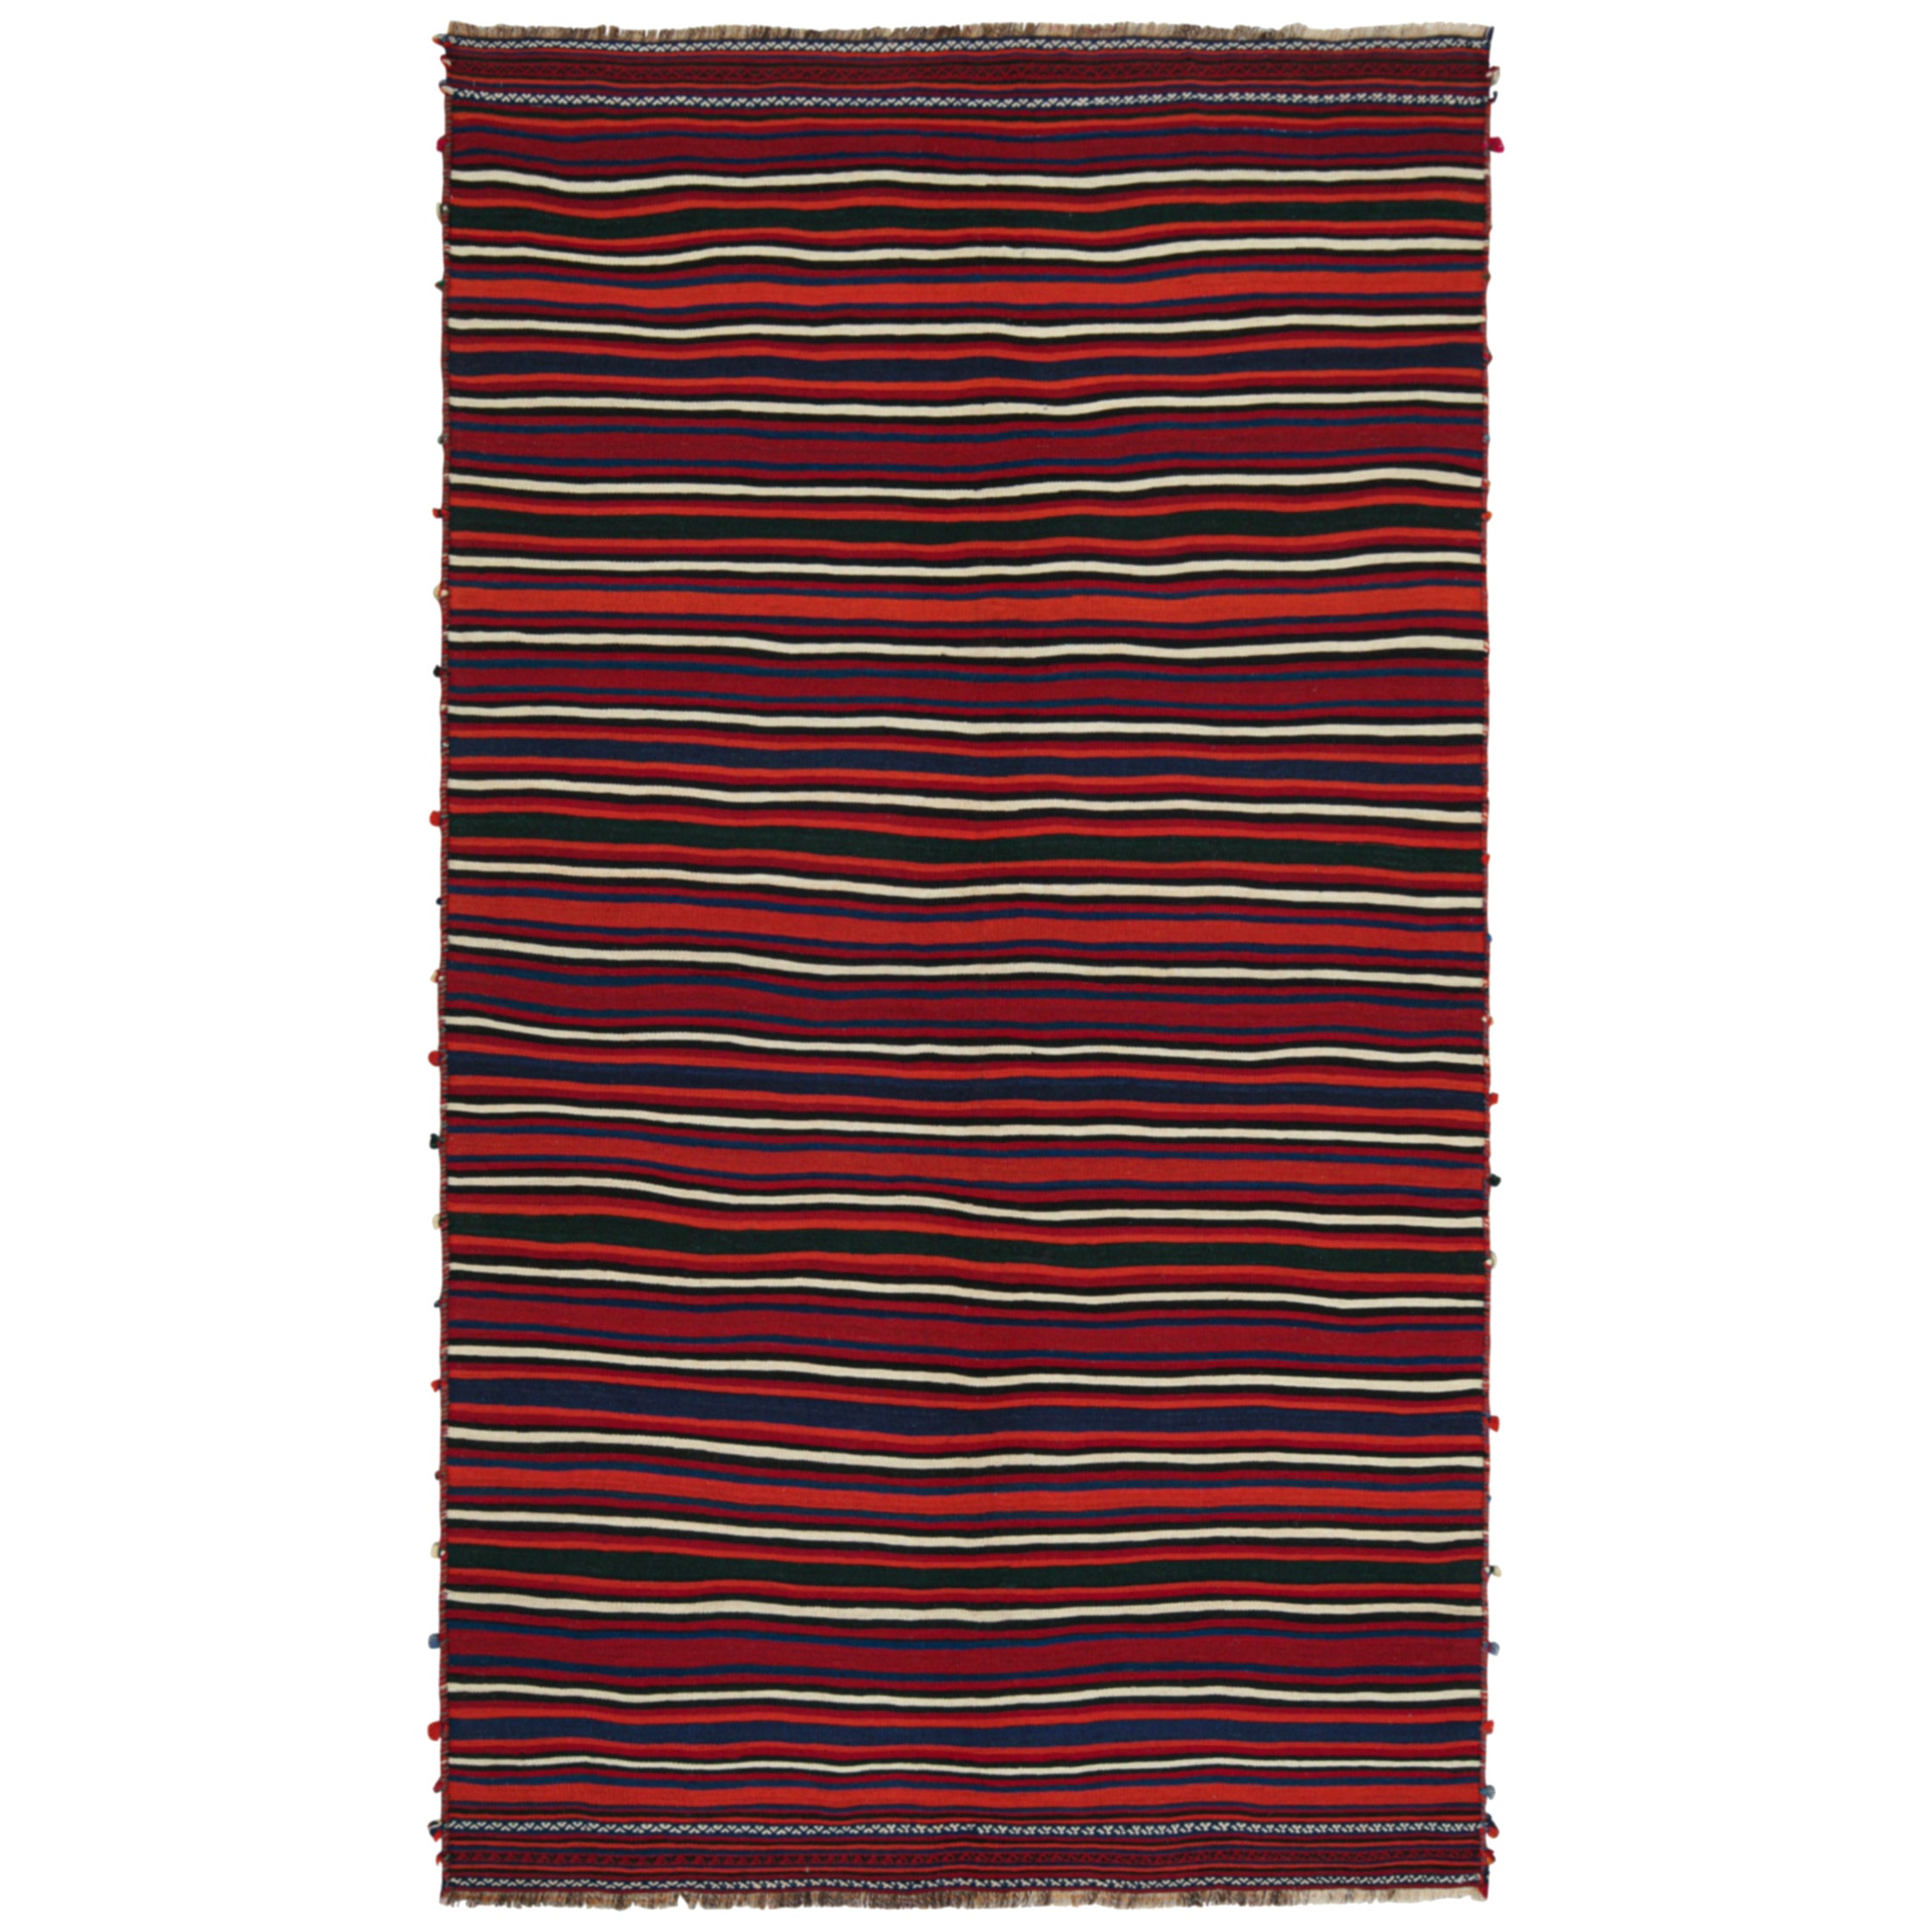 Vintage Persian Kilim with Burgundy Red and Navy Blue Stripes